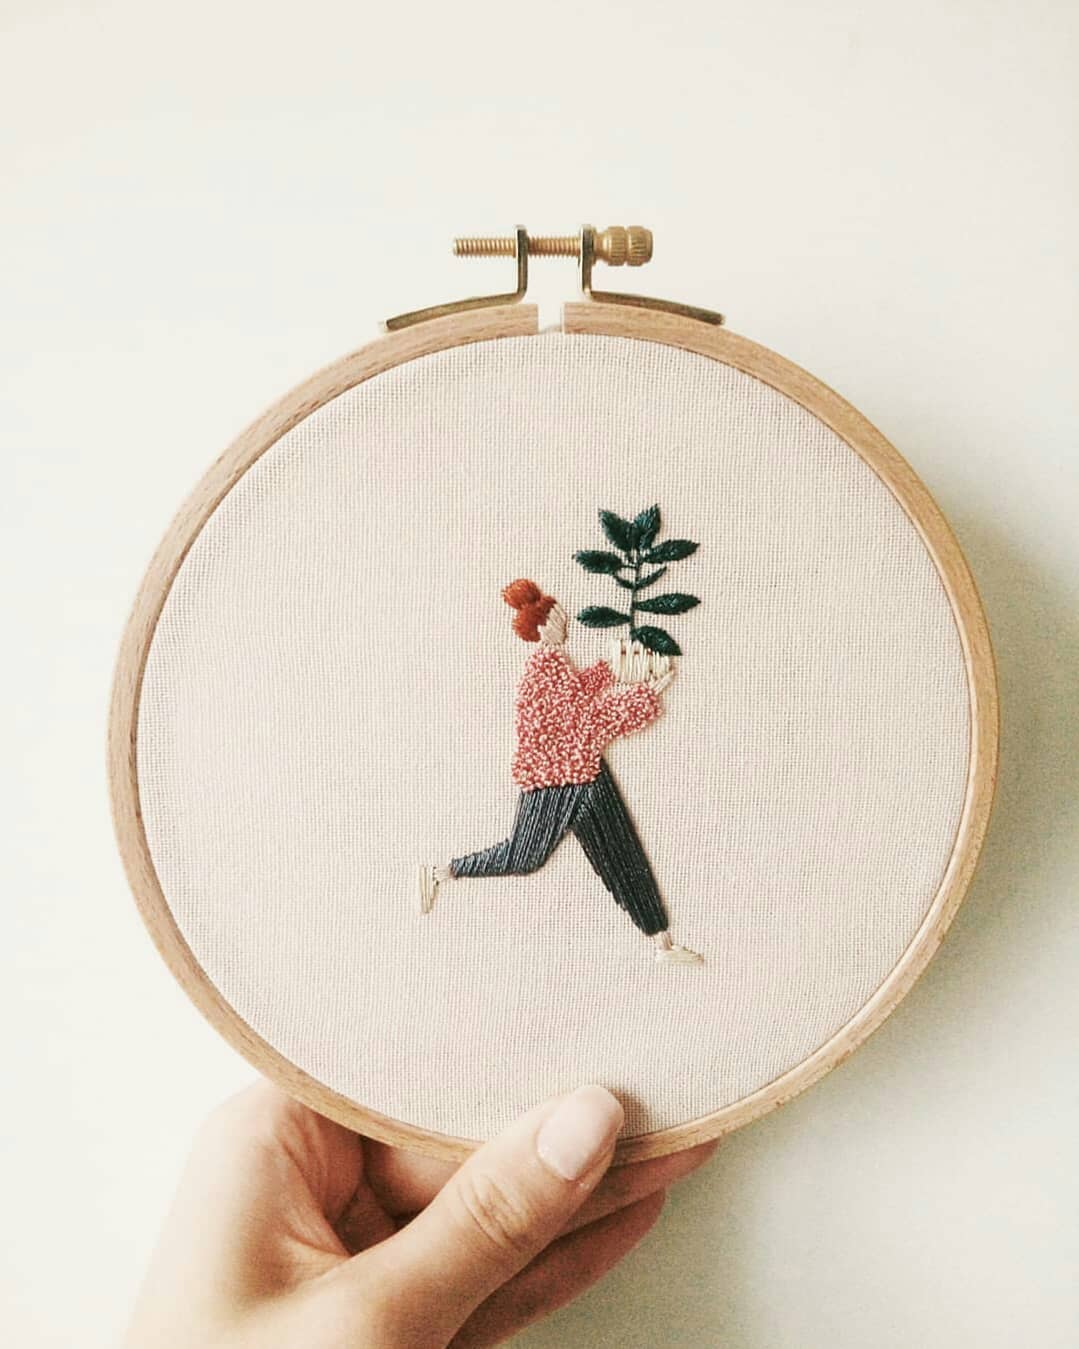 Plant embroidery